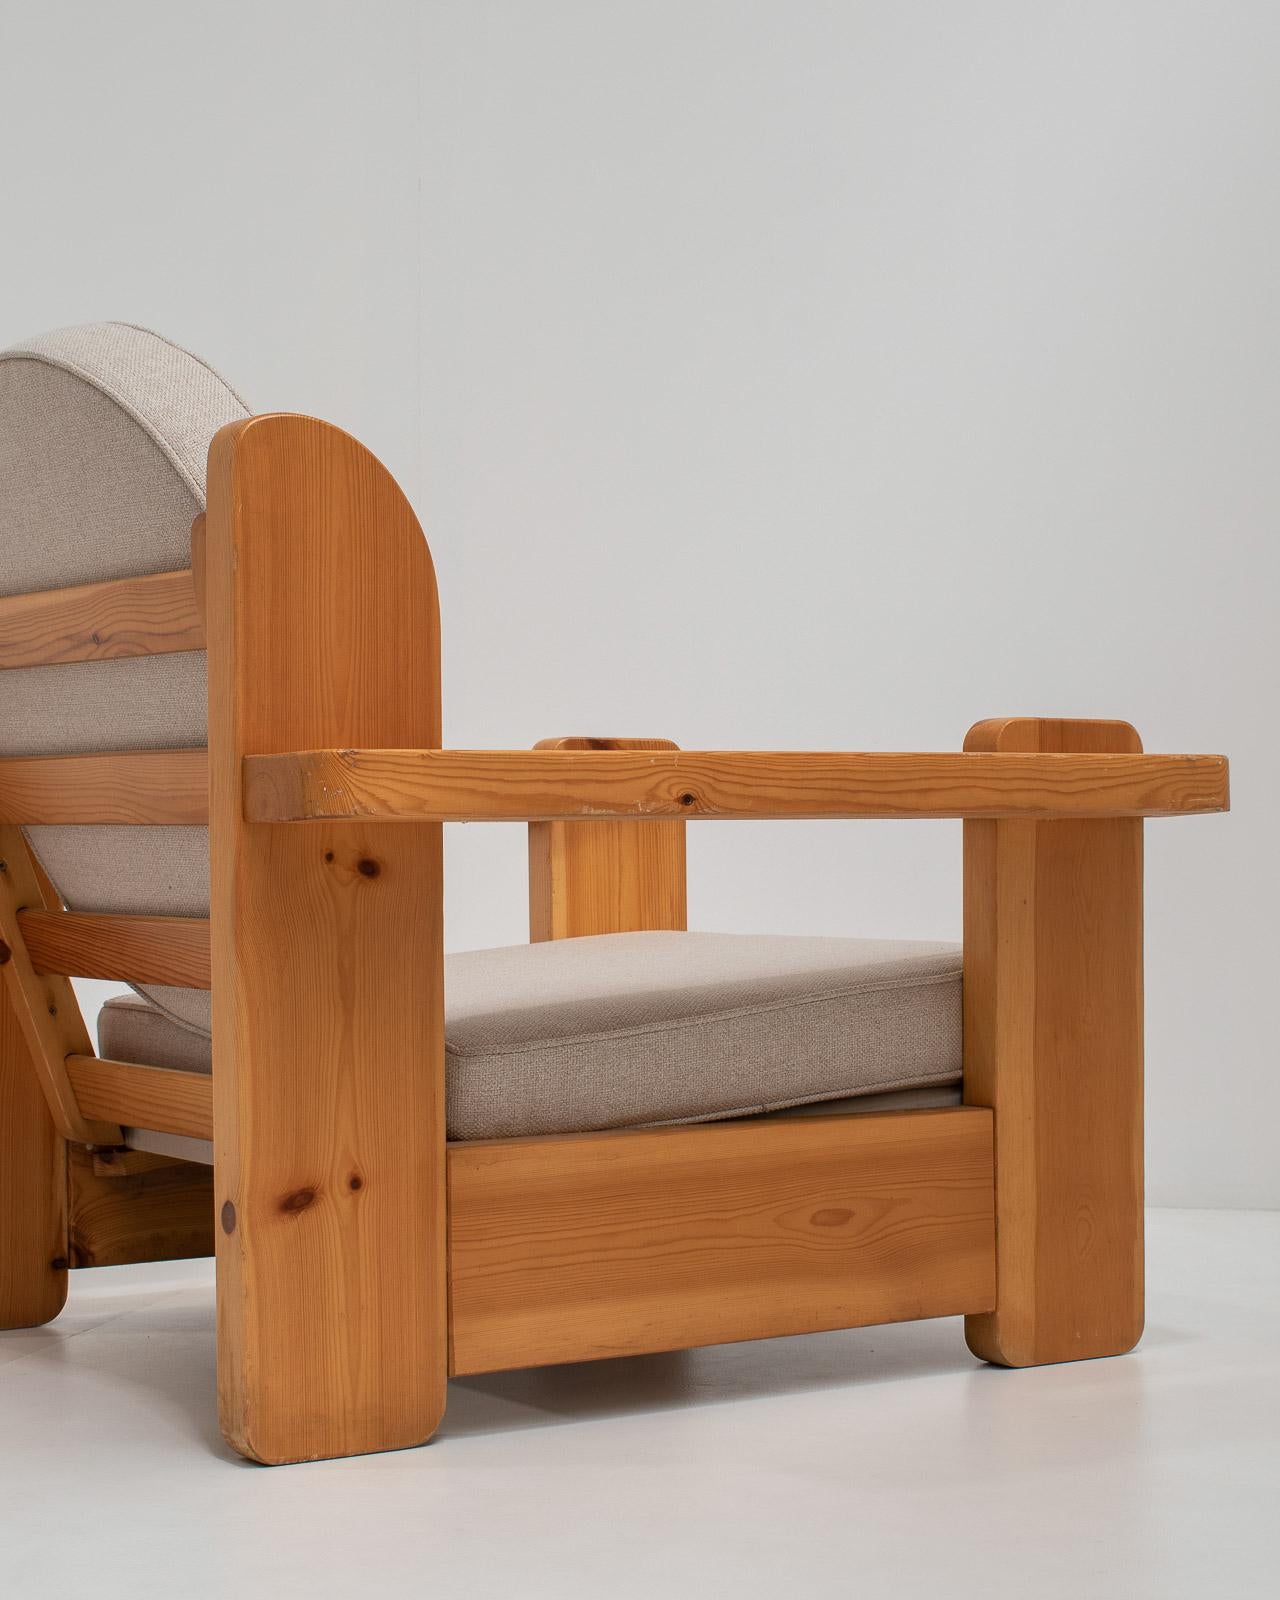 Late 20th Century Pair of Solid Pine Sculptural Lounge Chairs, Italy, 1970s For Sale